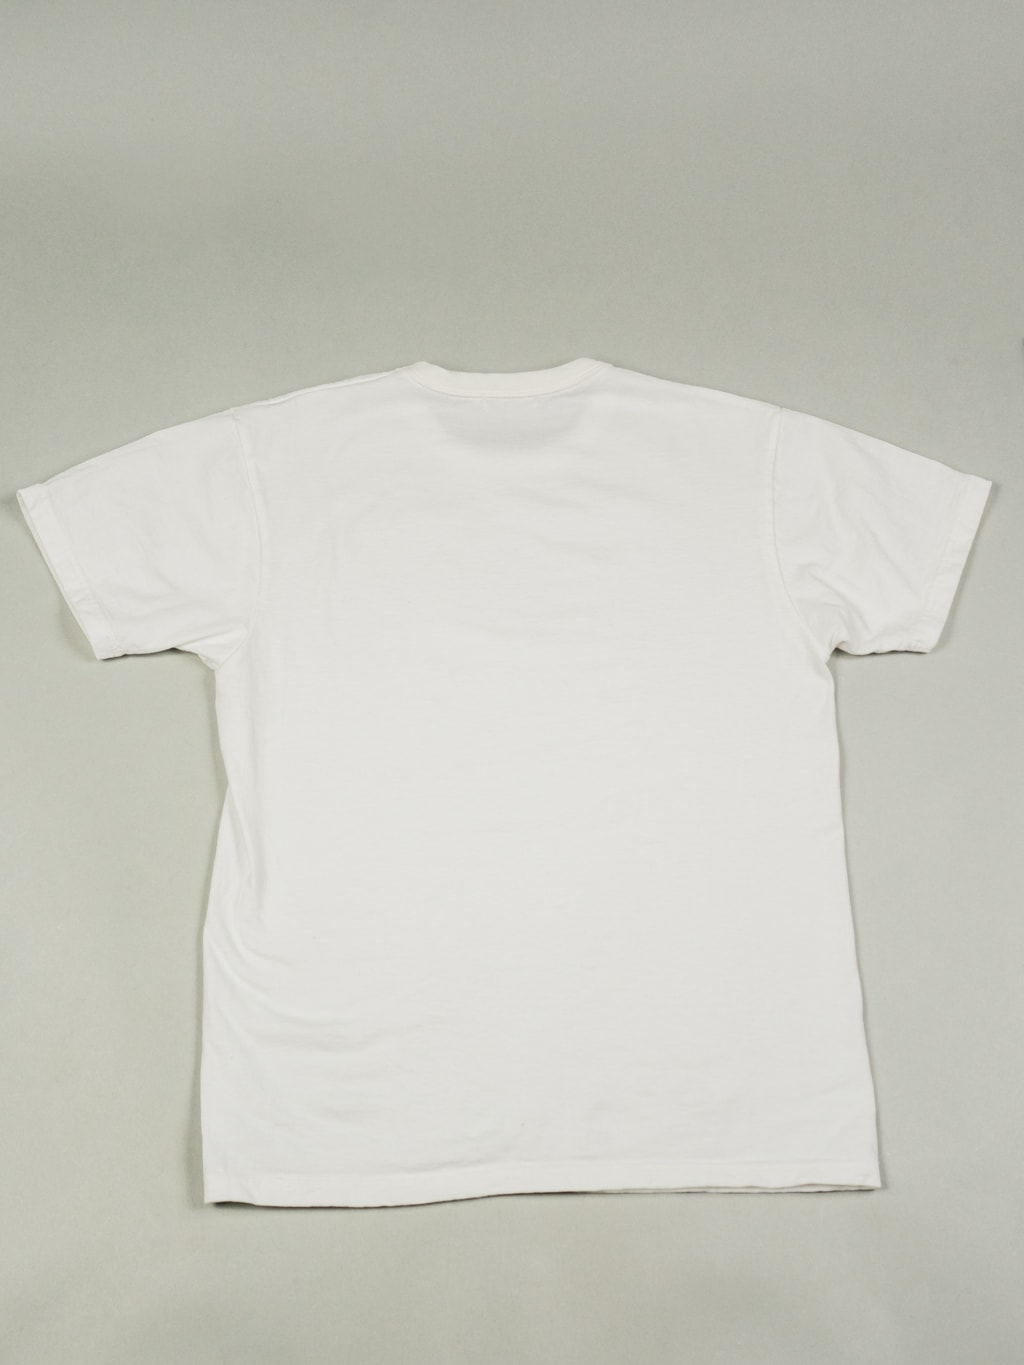 The Strike Gold Loopwheeled TShirt White Made in Japan Midweight